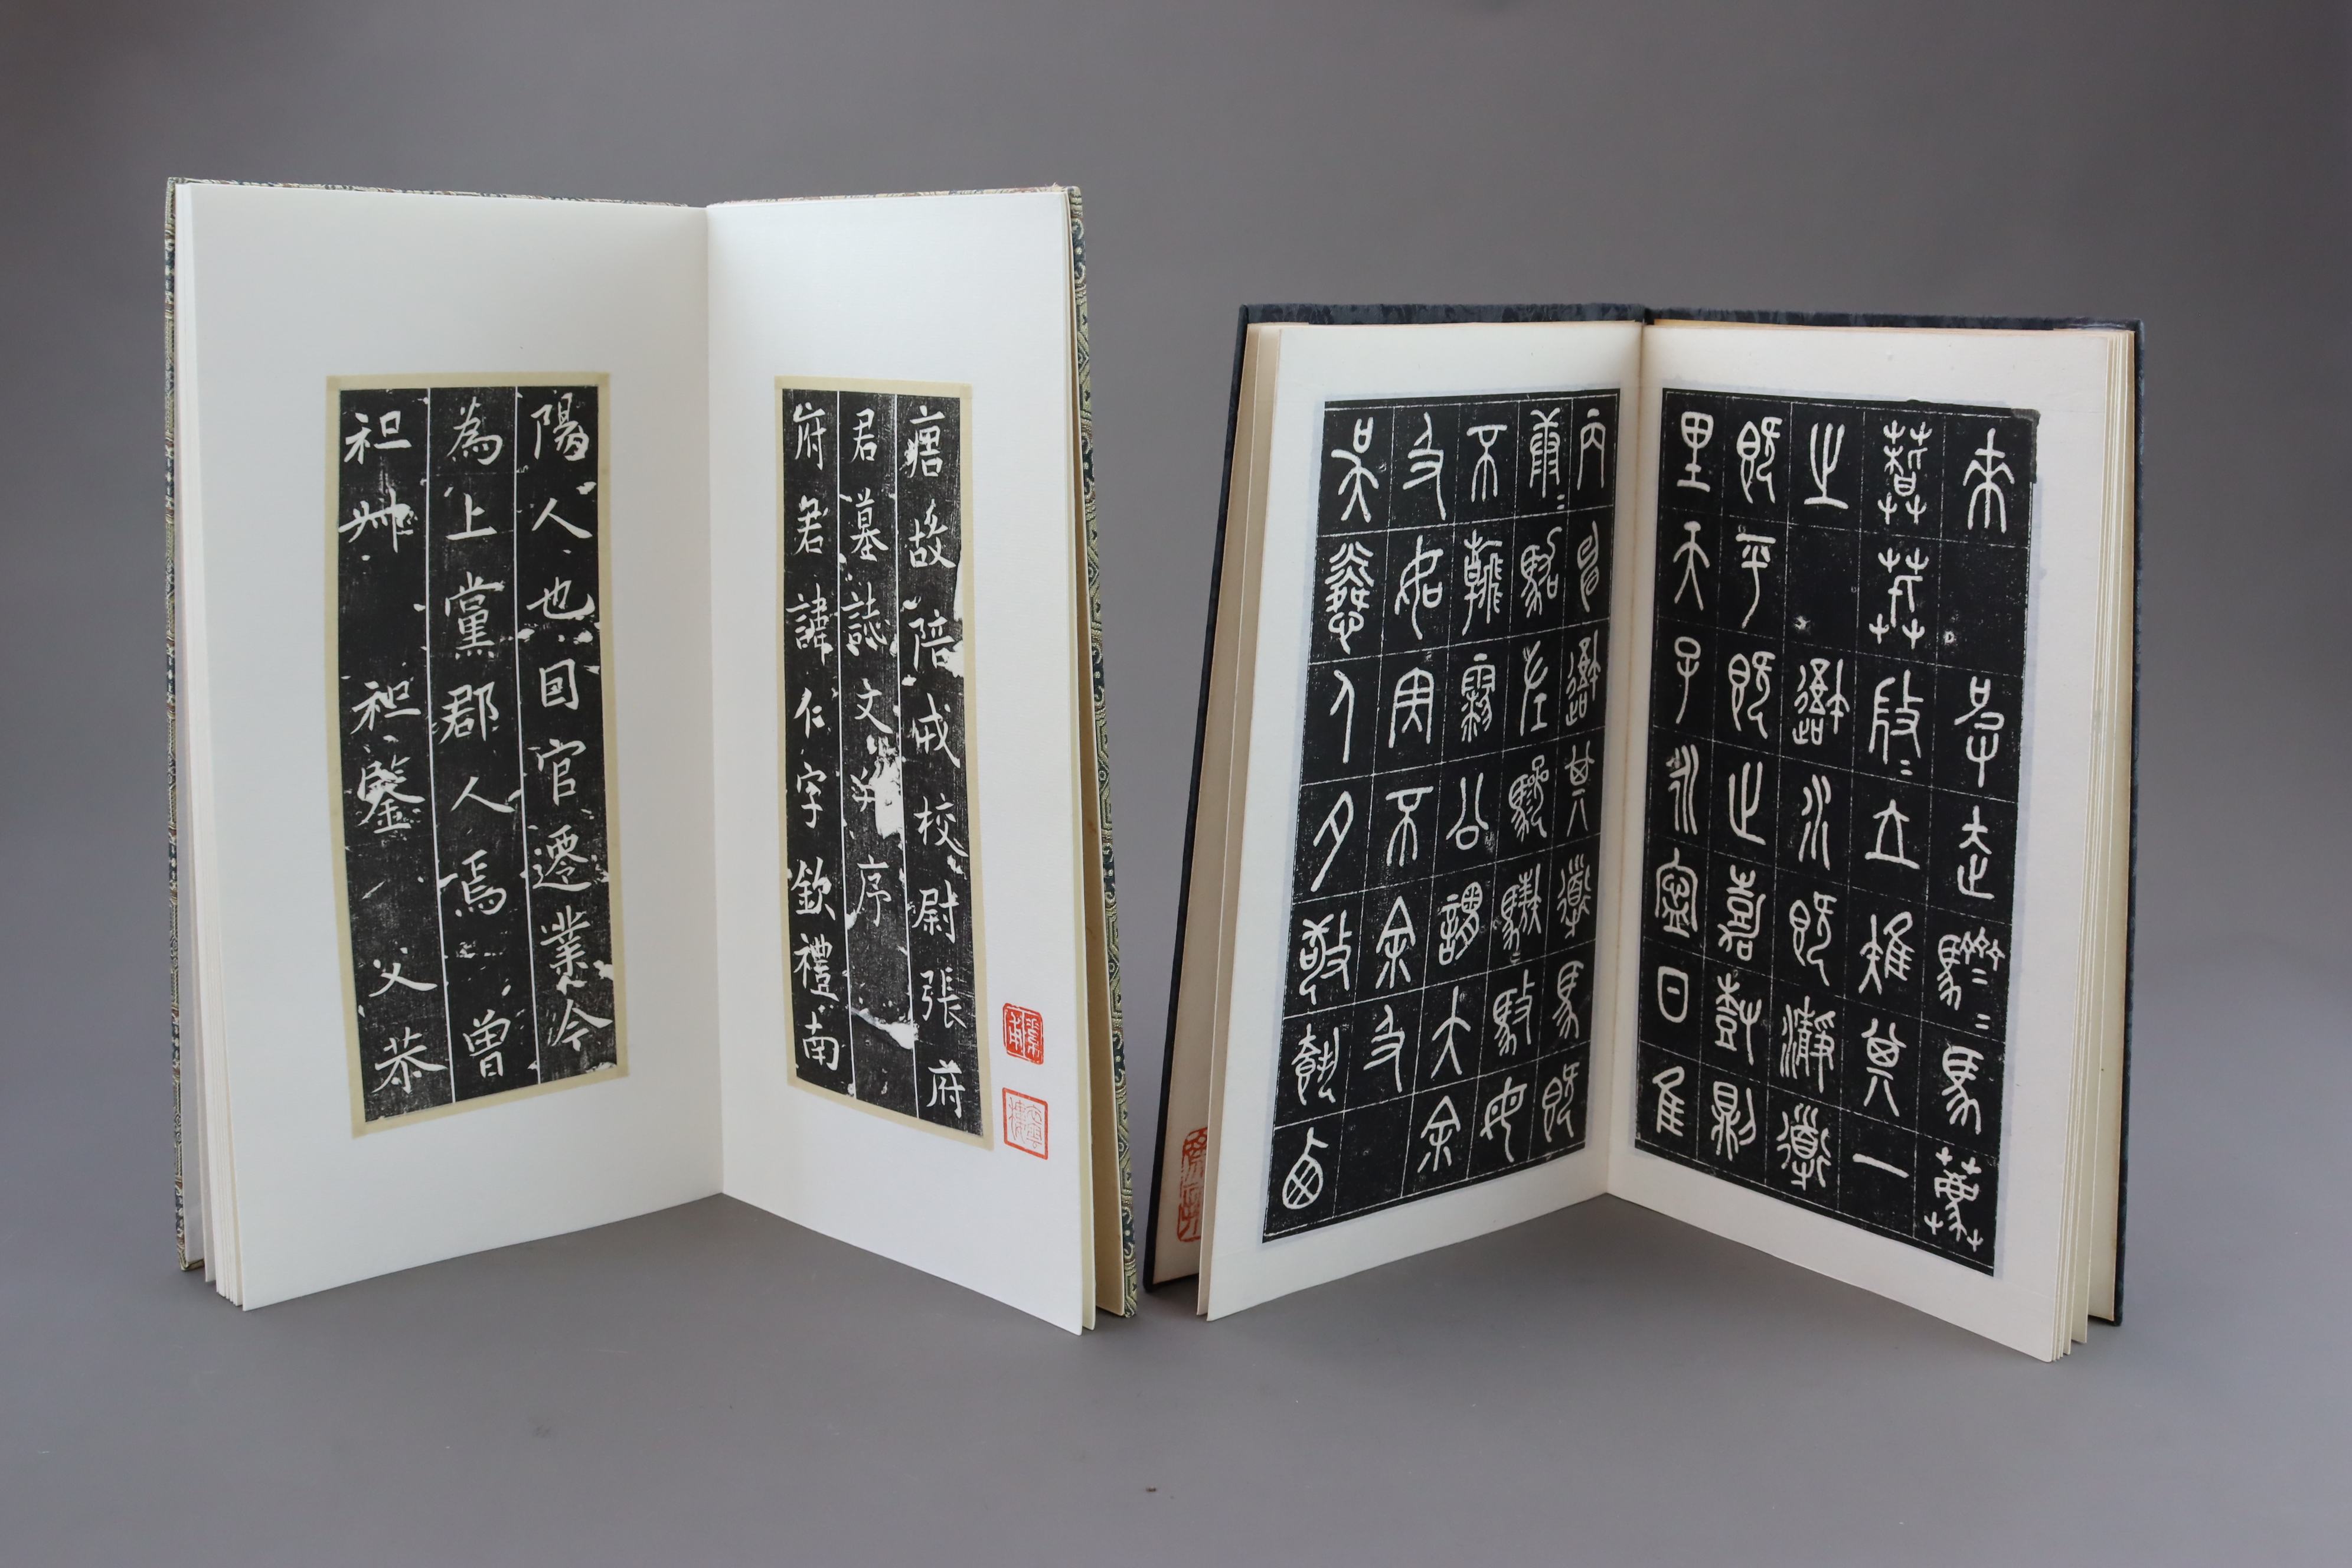 Two Chinese Calligraphy Rubbing, rubbing of Wu Changshuo's calligraphy and a rubbing of a tombstone - Image 2 of 6